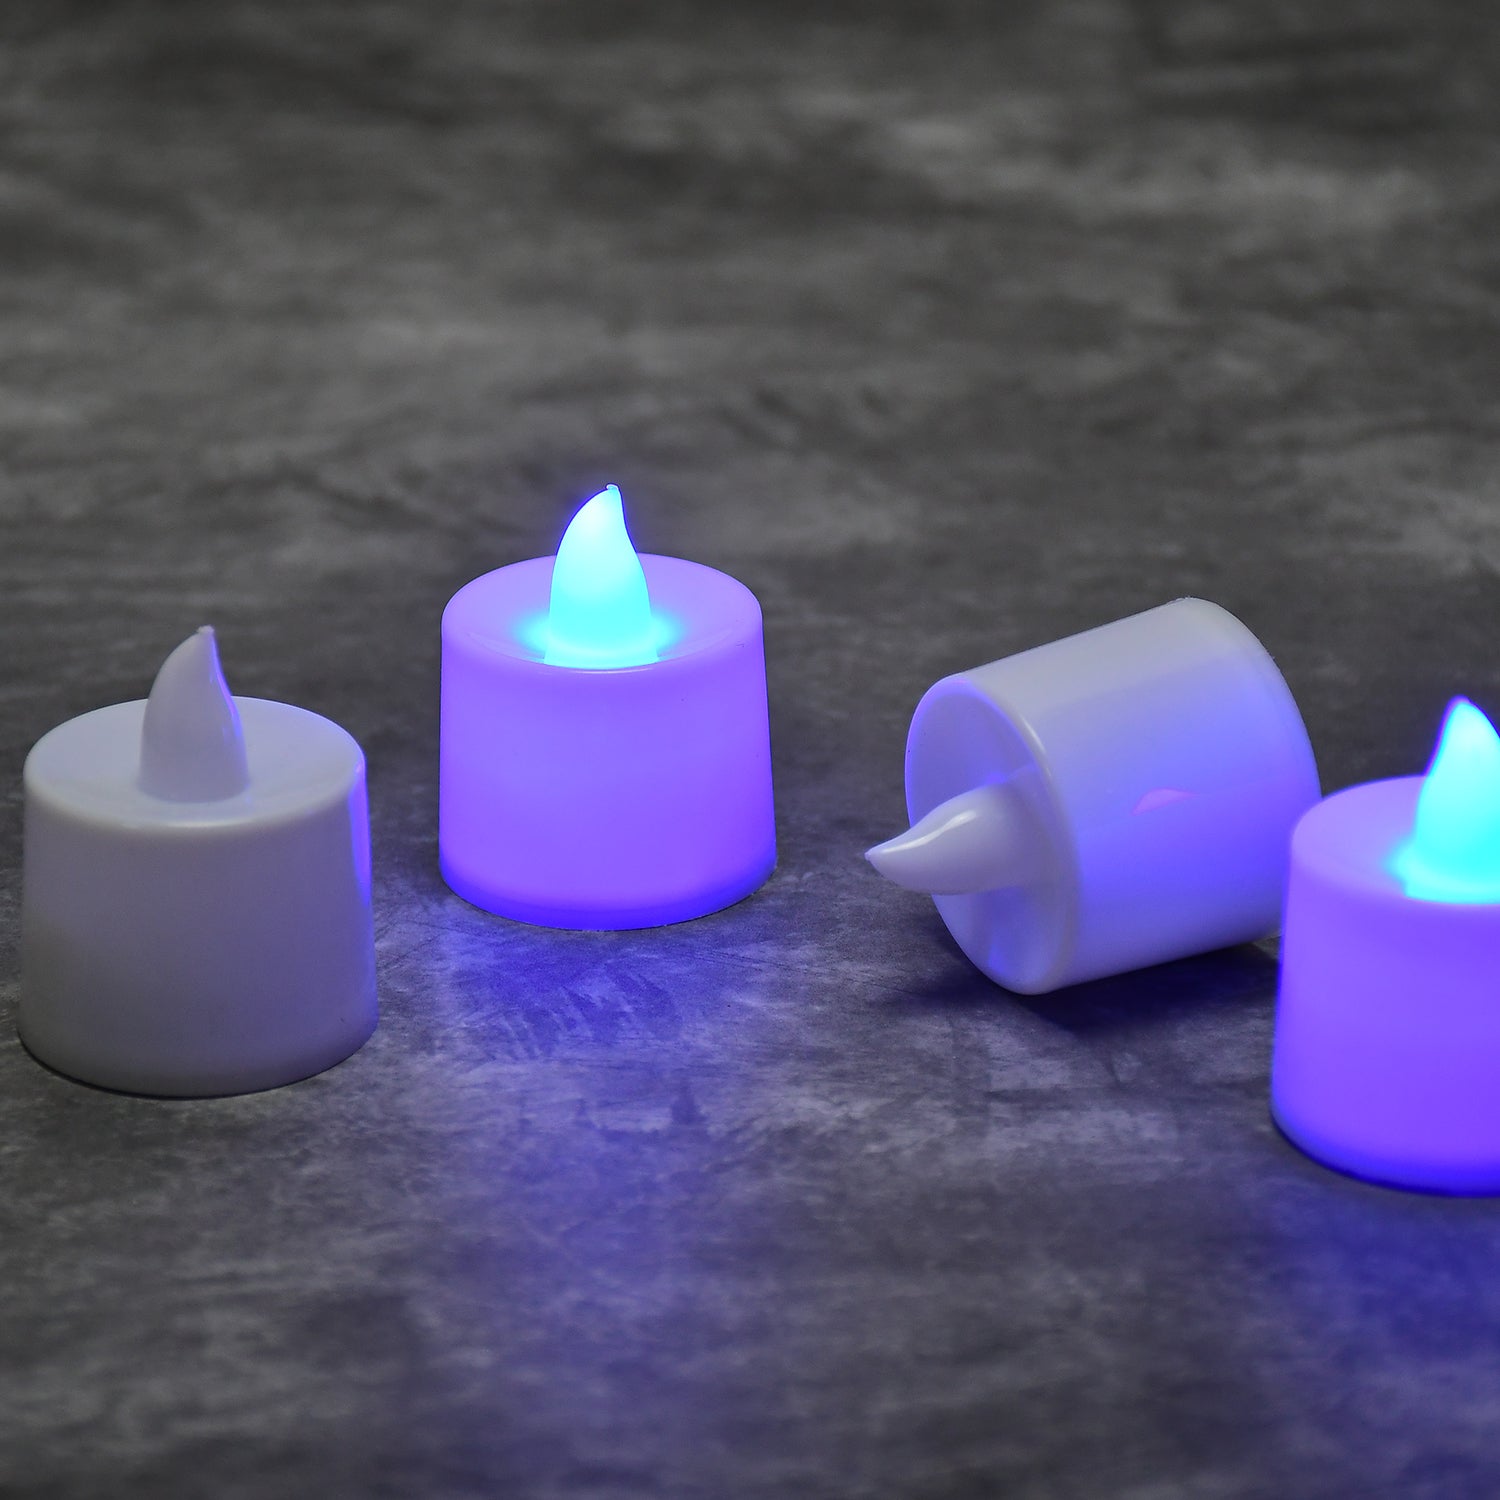 6634 Blue Flameless LED Tealights, Smokeless Plastic Decorative Candles - Led Tea Light Candle For Home Decoration (Pack Of 24) DeoDap